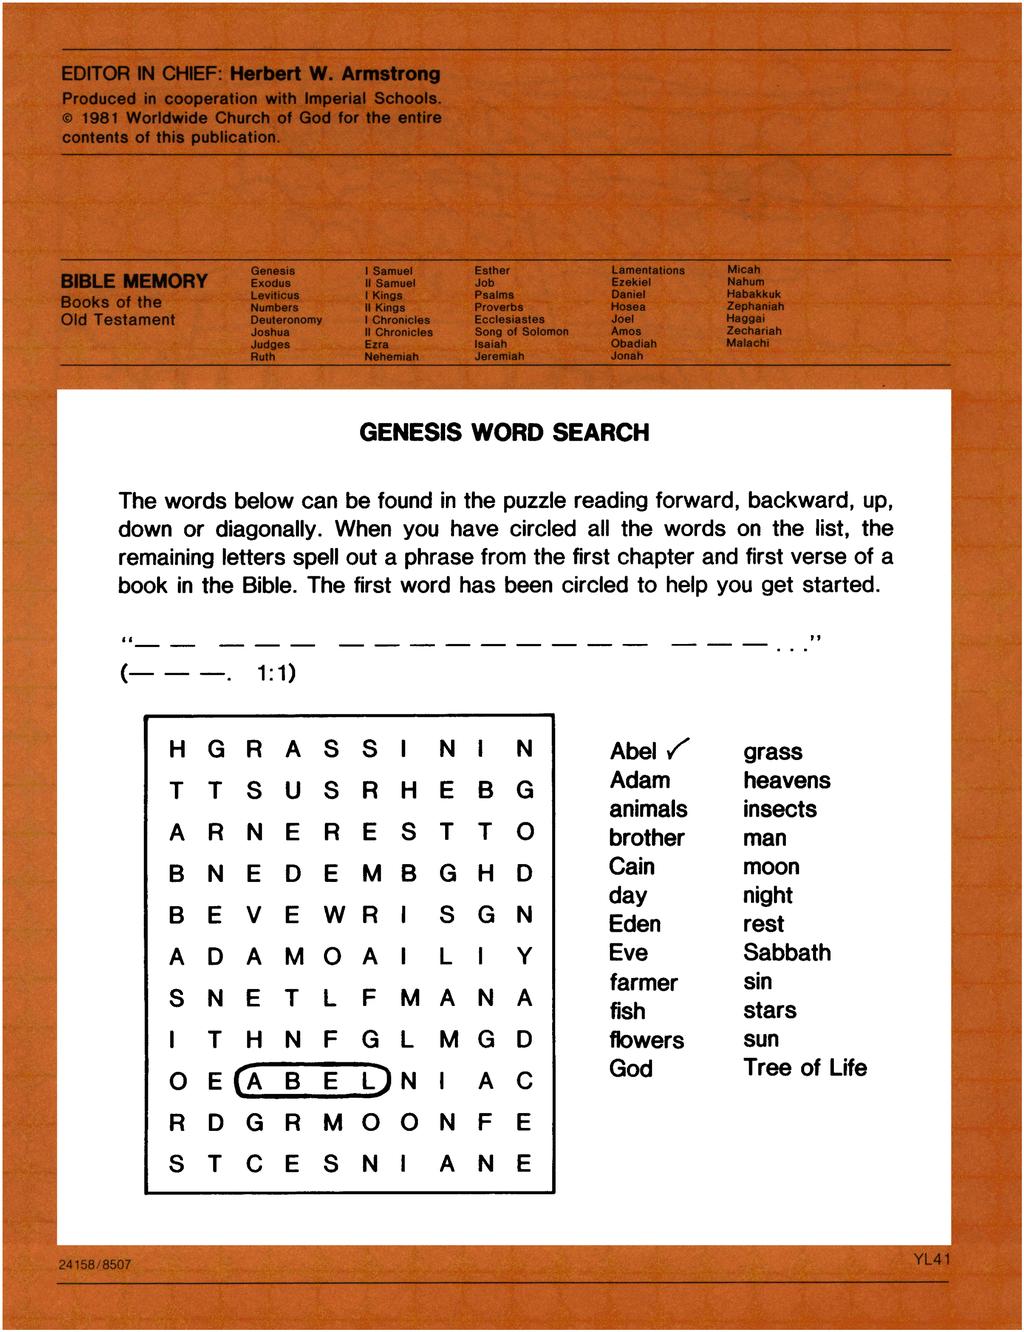 GENESIS WORD SEARCH The words below can be found in the puzzle reading forward, backward, up, down or diagonally.